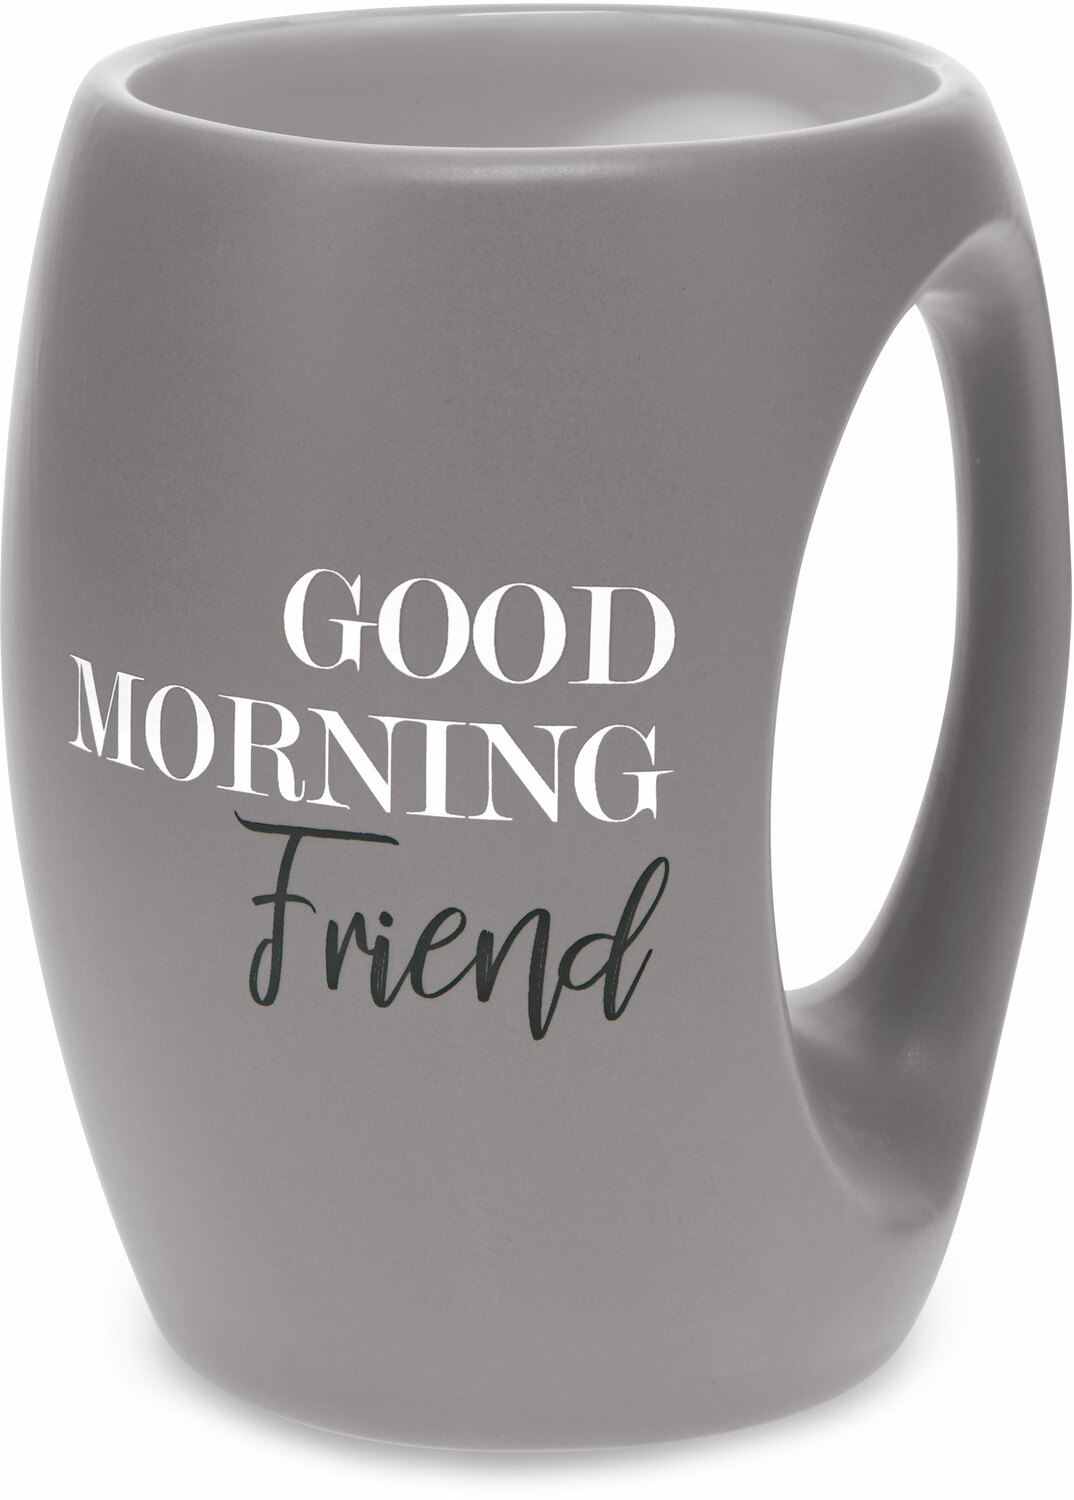 Friend by Good Morning - Friend - 16 oz Cup